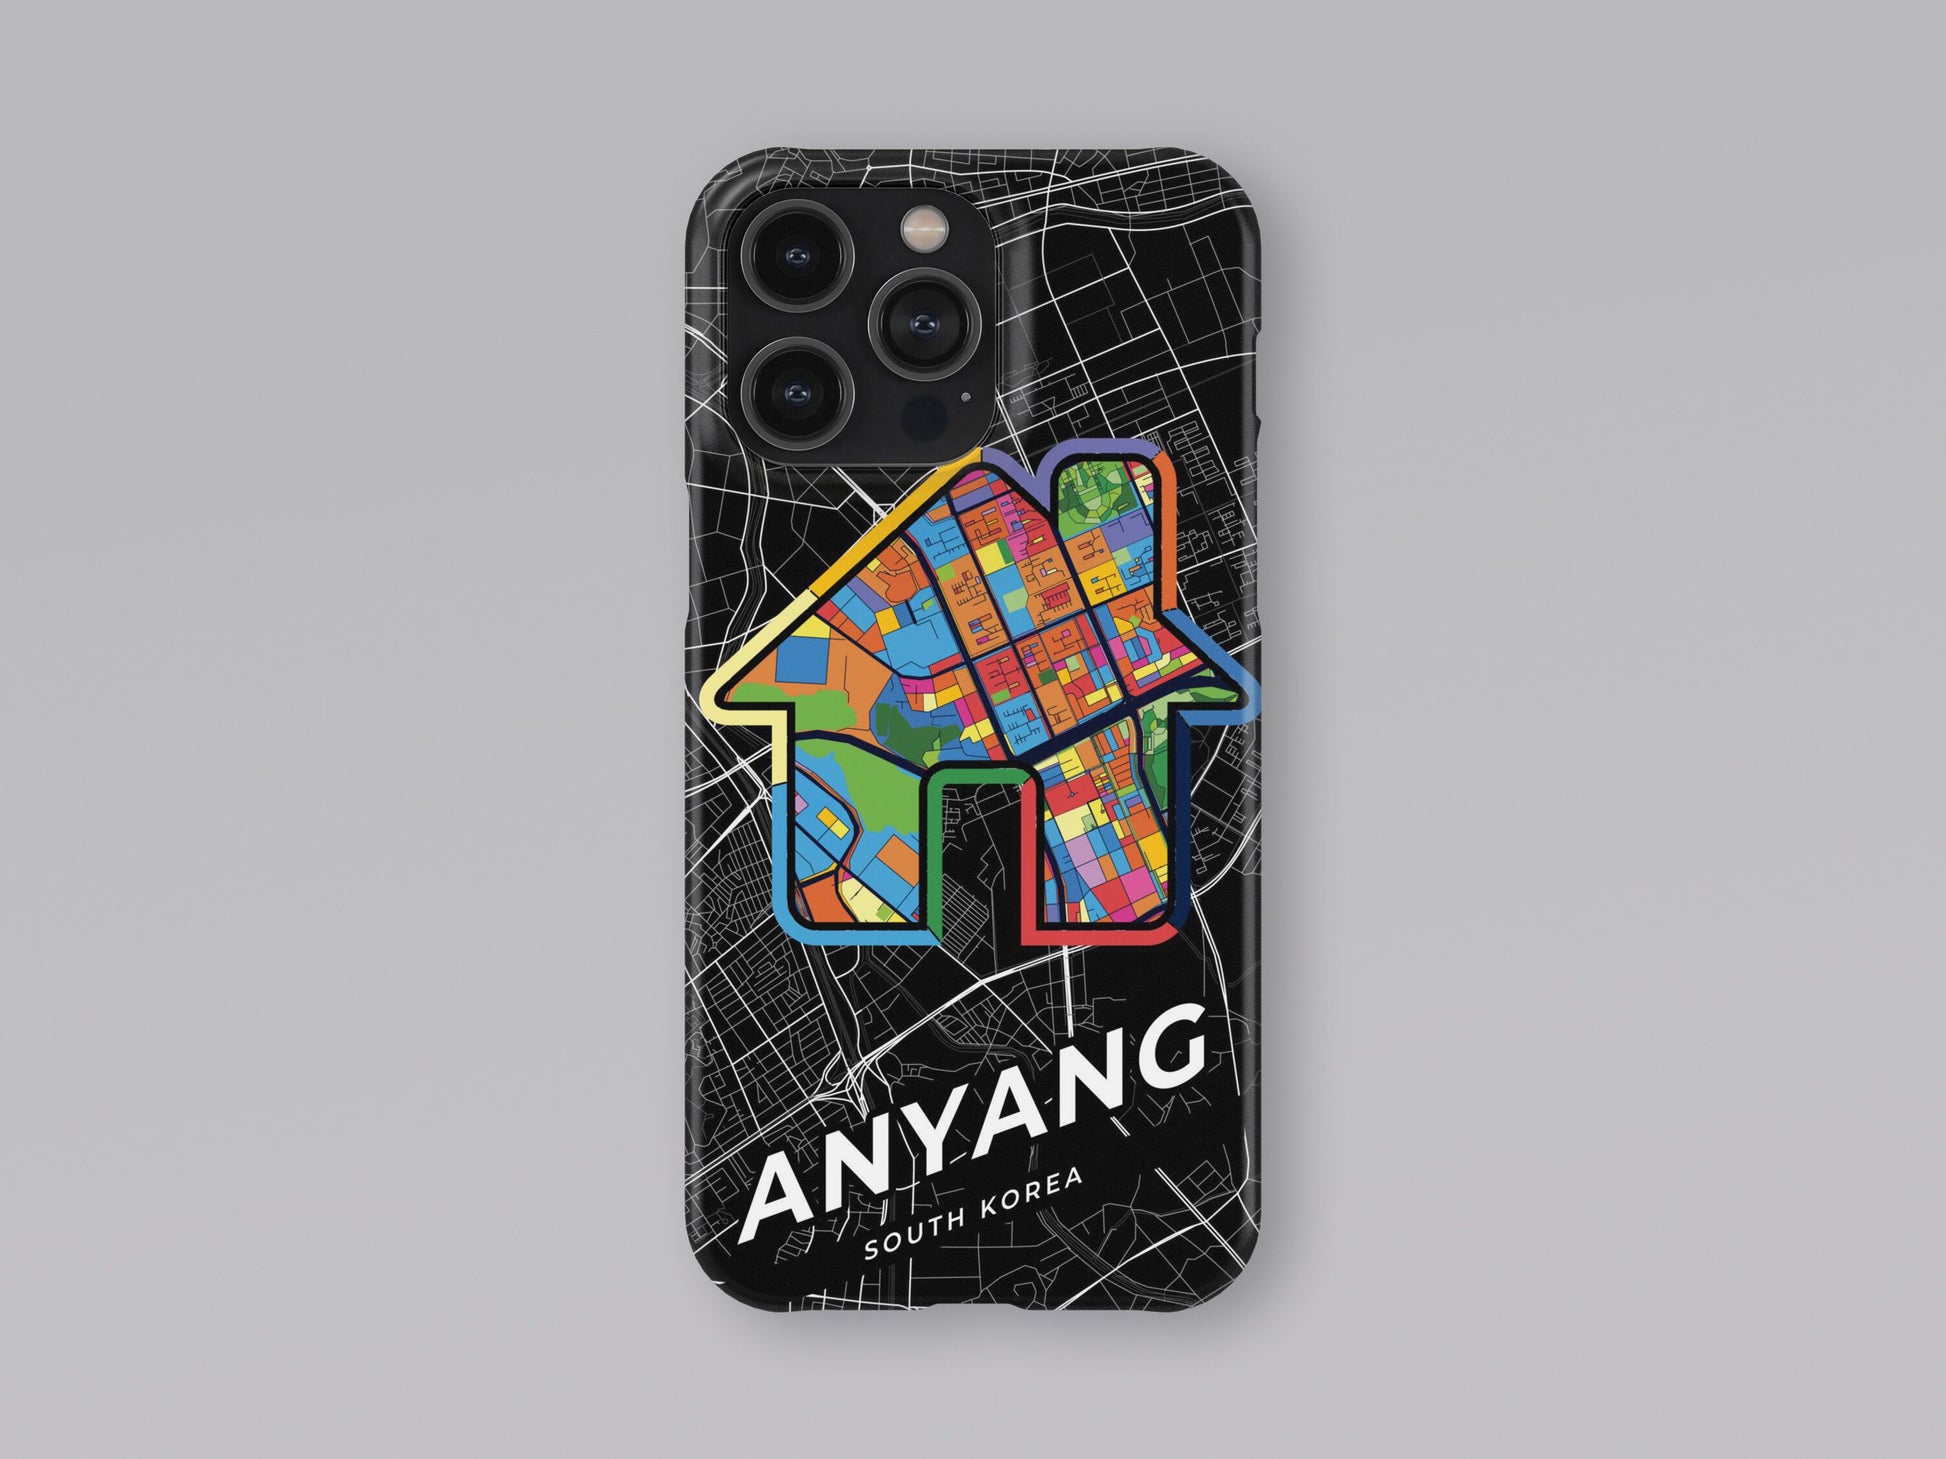 Anyang South Korea slim phone case with colorful icon. Birthday, wedding or housewarming gift. Couple match cases. 3